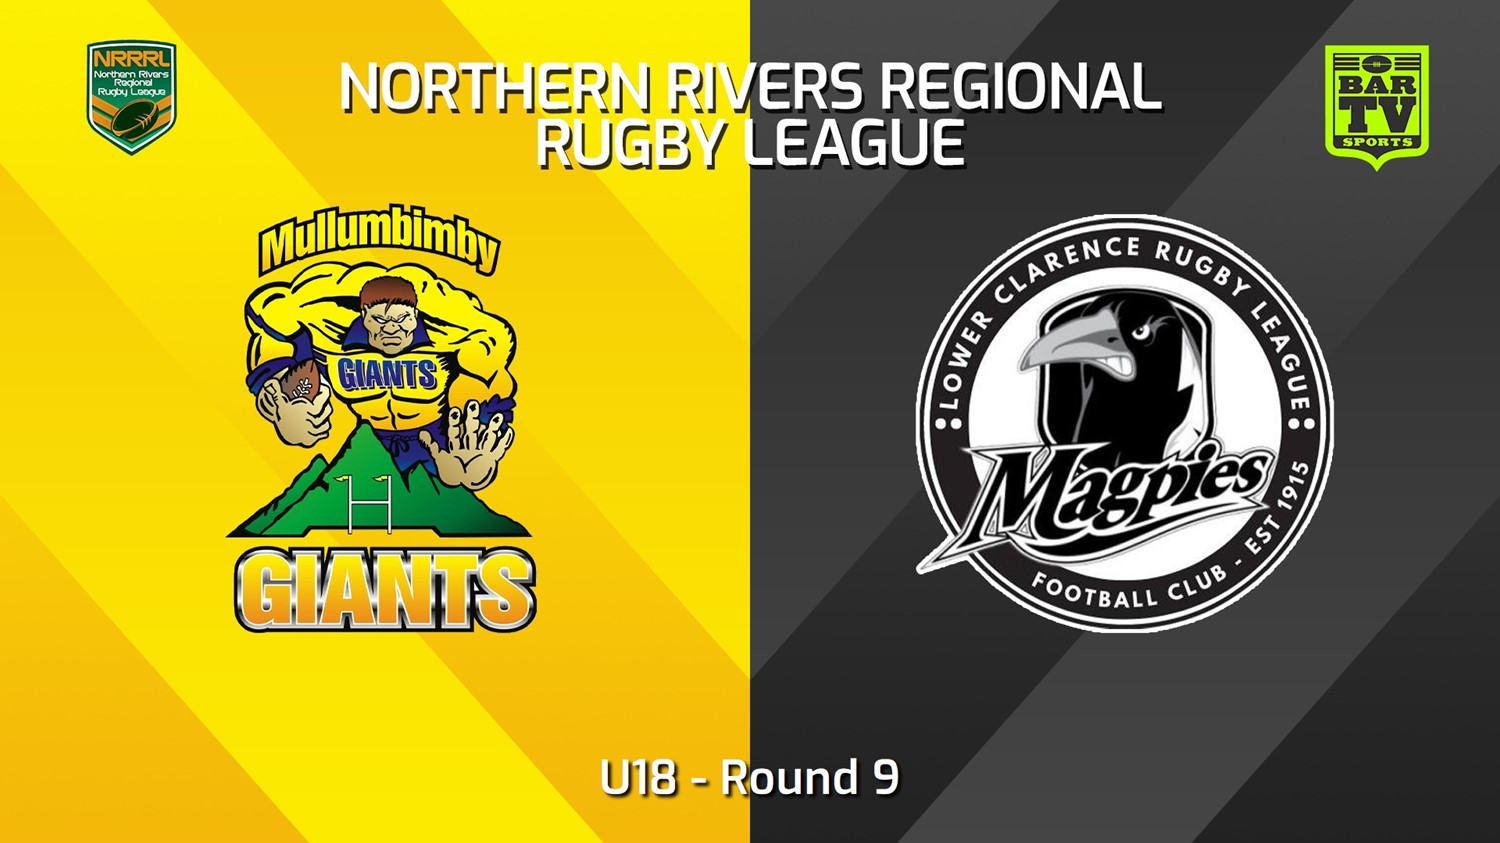 240602-video-Northern Rivers Round 9 - U18 - Mullumbimby Giants v Lower Clarence Magpies Slate Image